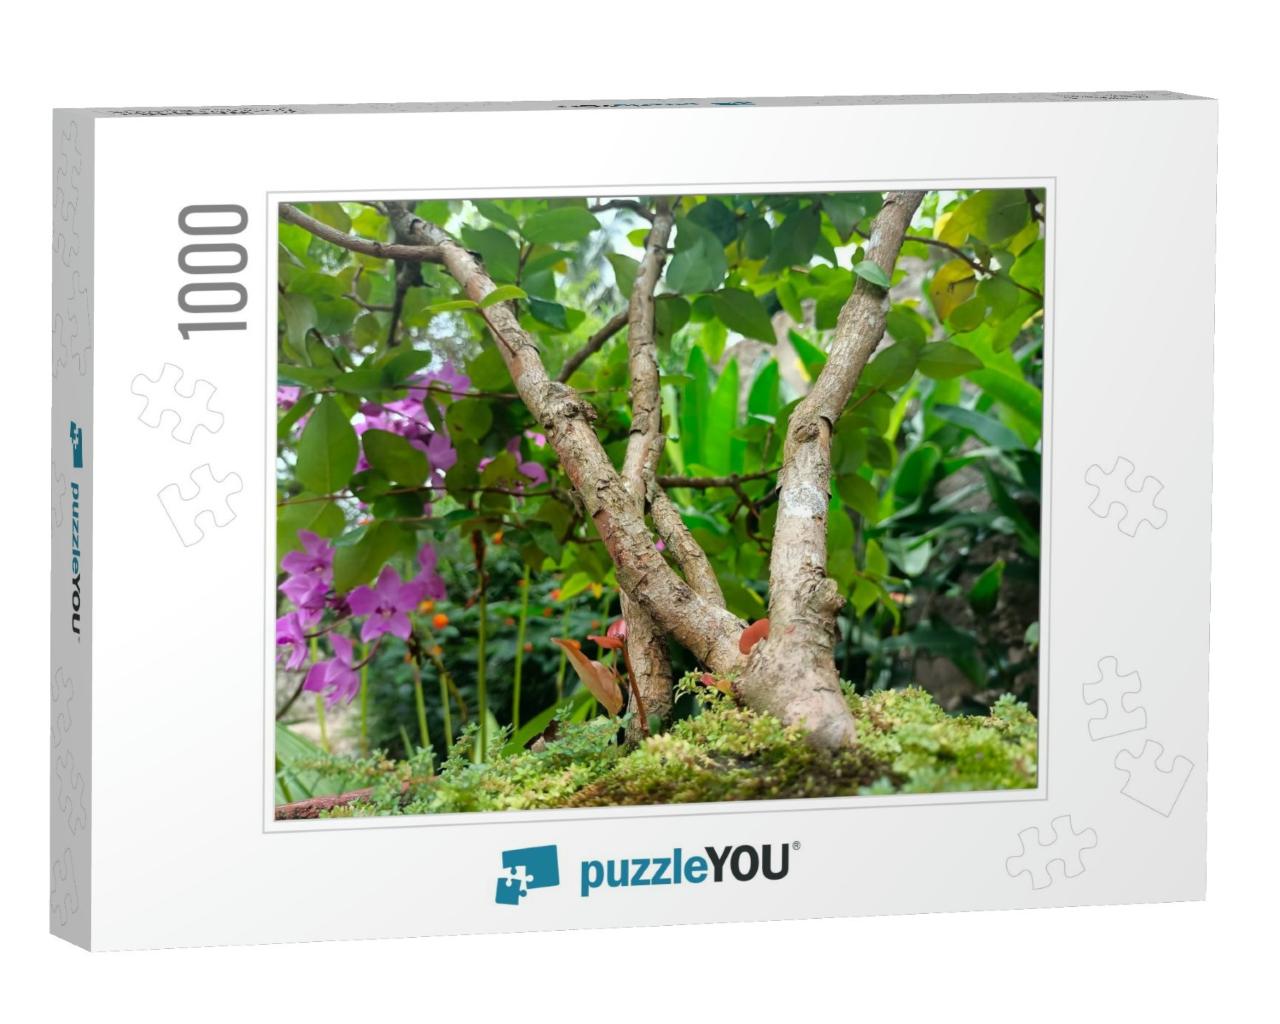 Best Picture of Bonsai Tree in Tropical Nature... Jigsaw Puzzle with 1000 pieces